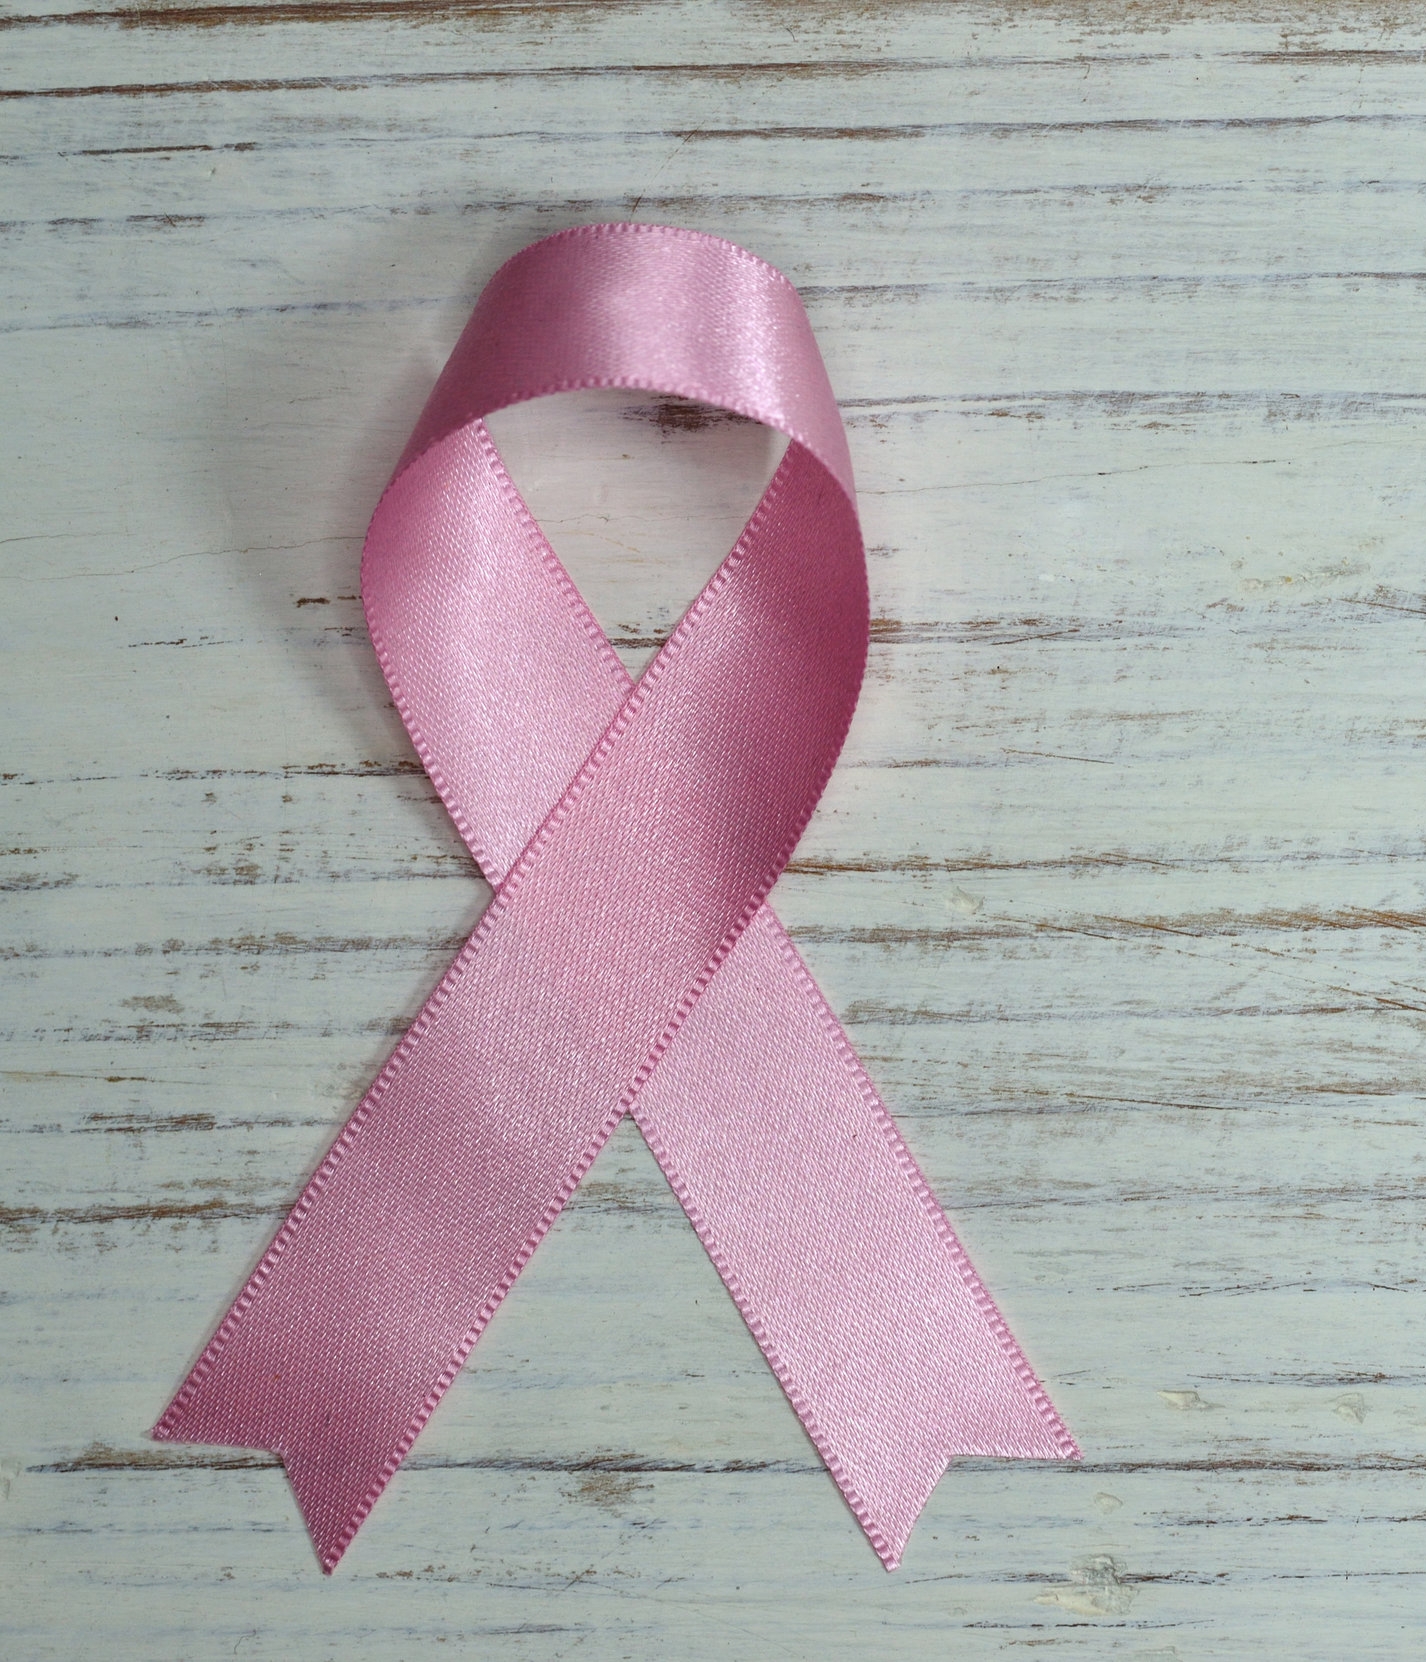 Copy of breast cancer awareness